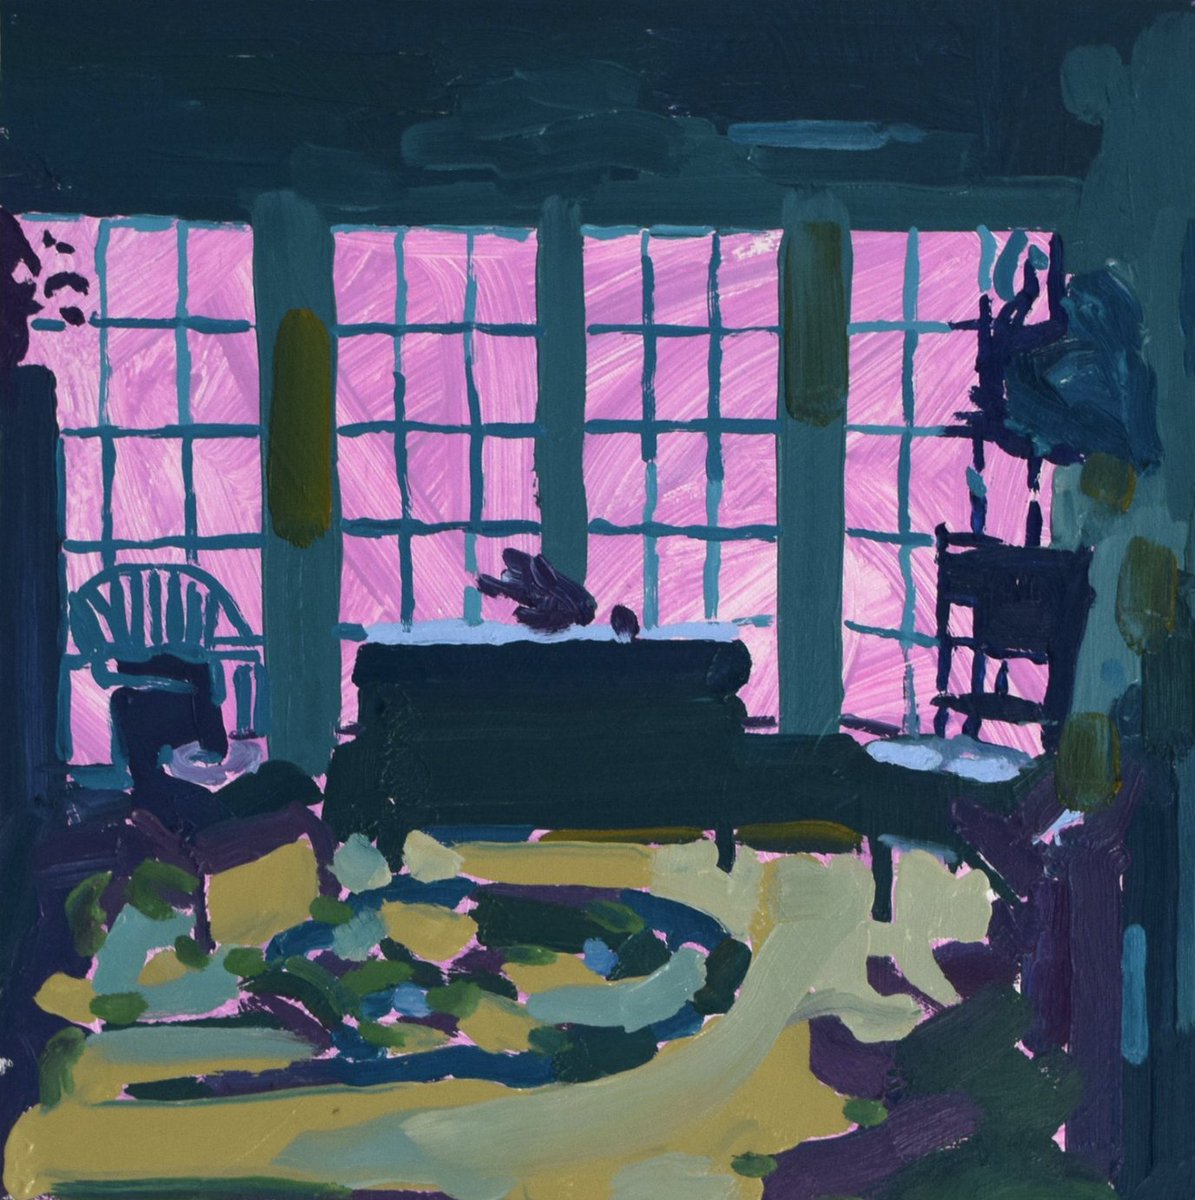 Tessa Greene O'Brien, based in Maine, does lovely, vibrant things with architecture and interiors. On Instagram here:  https://www.instagram.com/tessagreeneobrien/